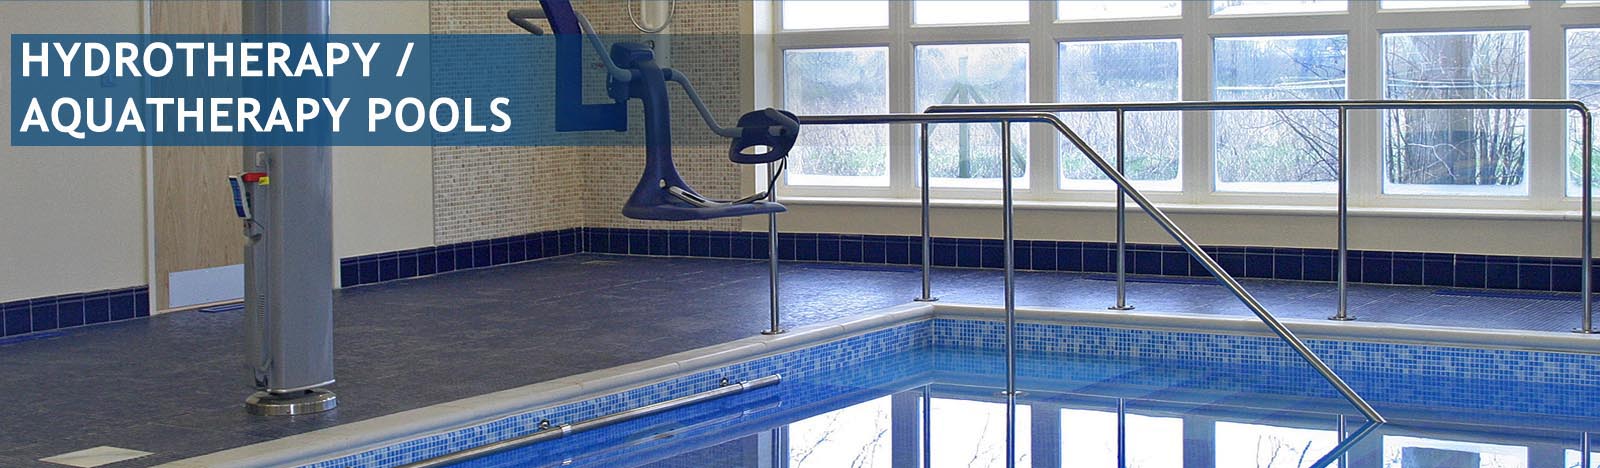 hydrotherapy pools specialists nottingham